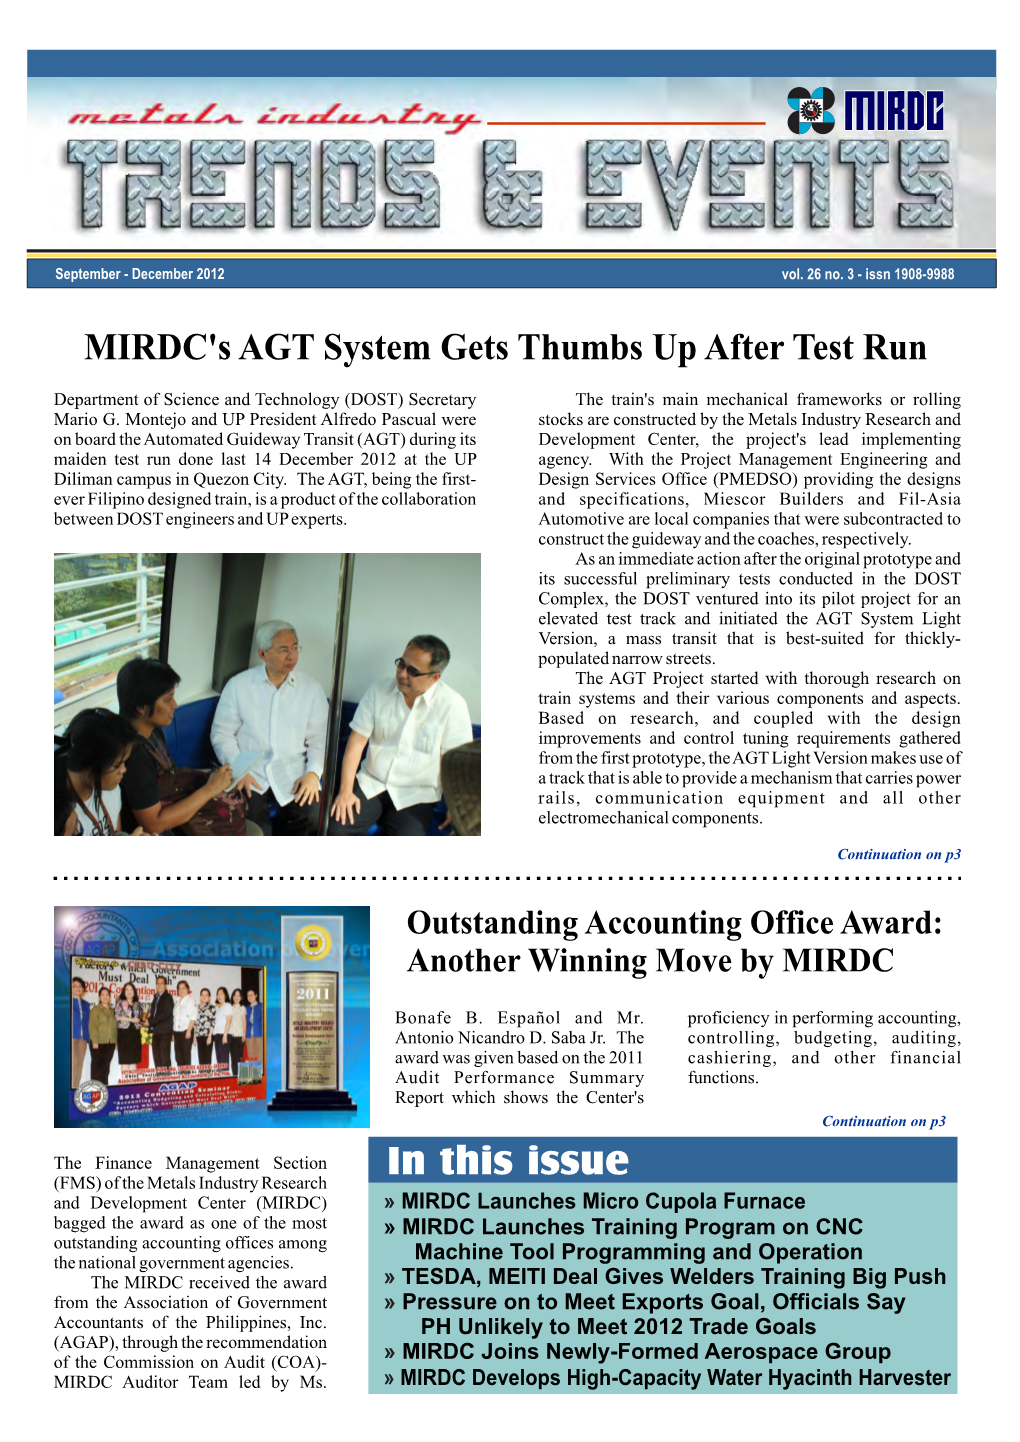 MIRDC's AGT System Gets Thumbs up After Test Run